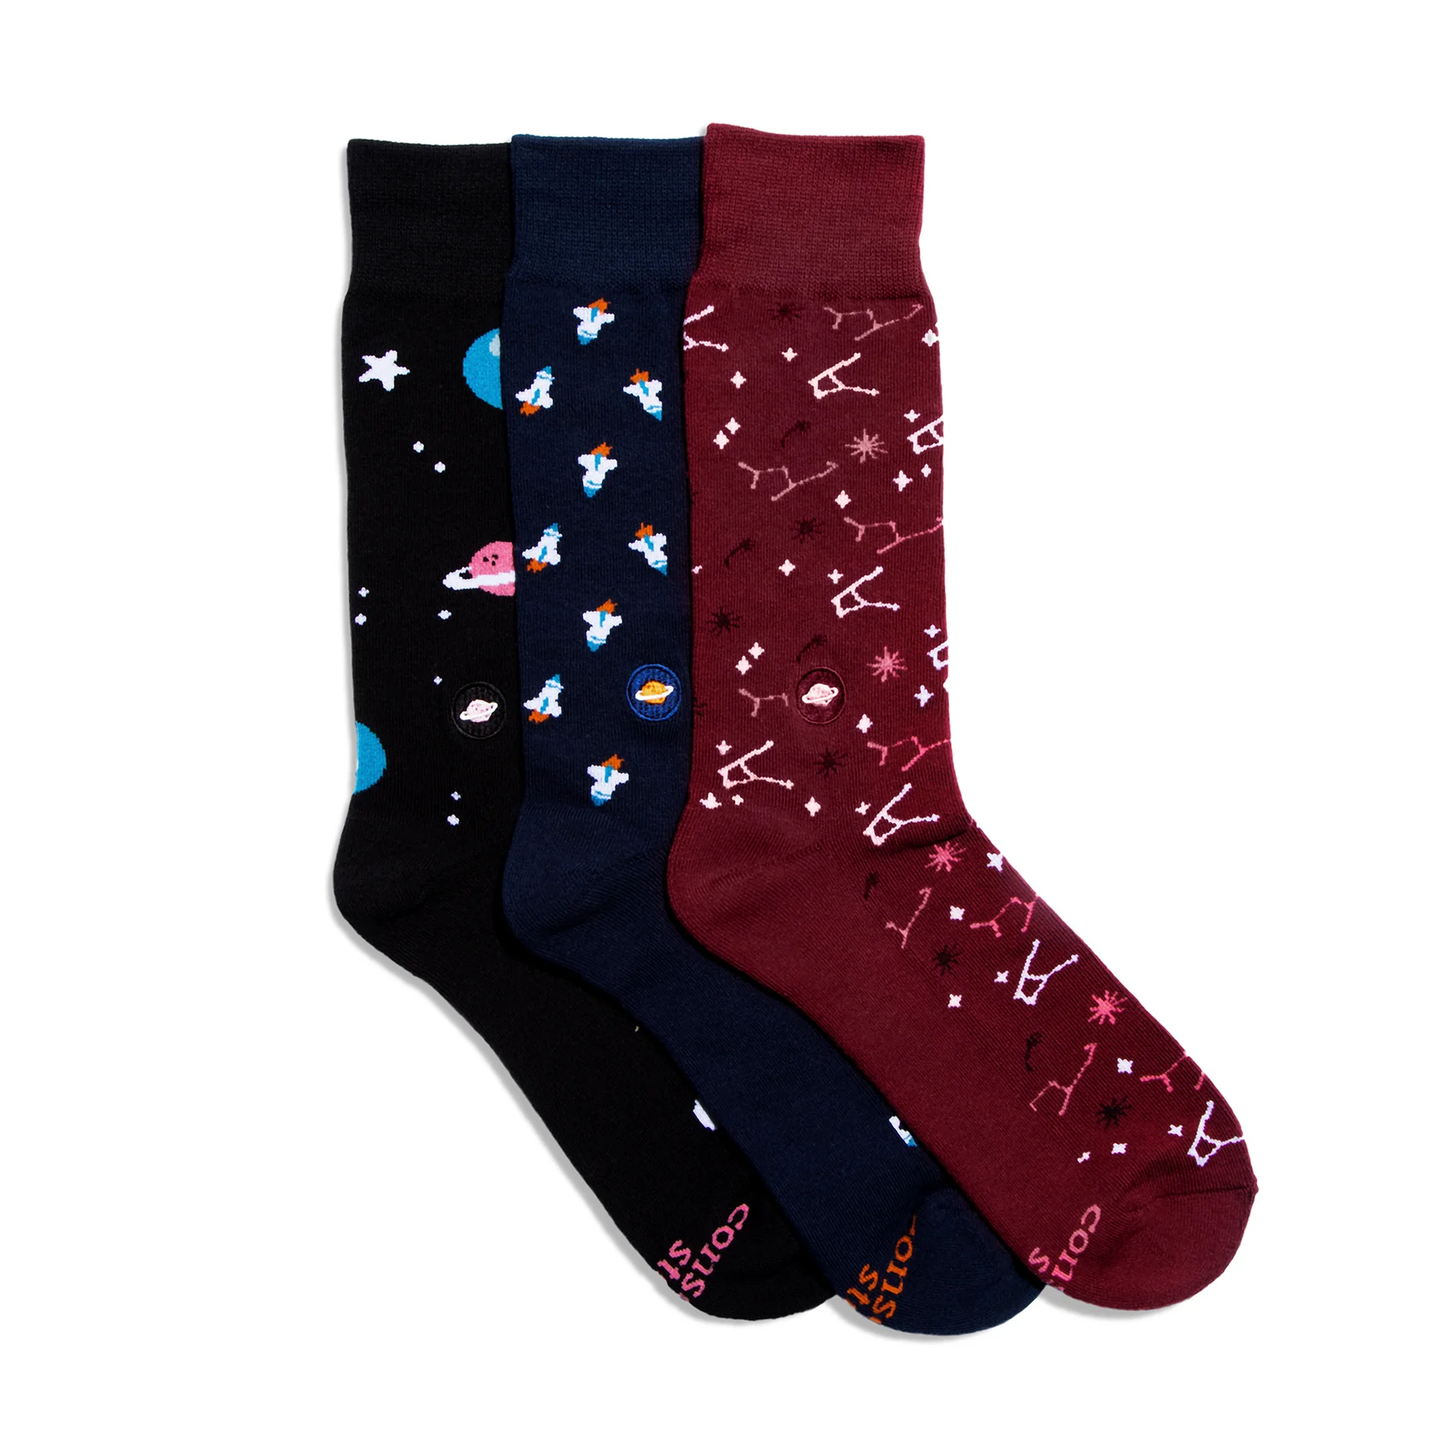 Conscious Step - Gift Box: Socks that support Space Exploration